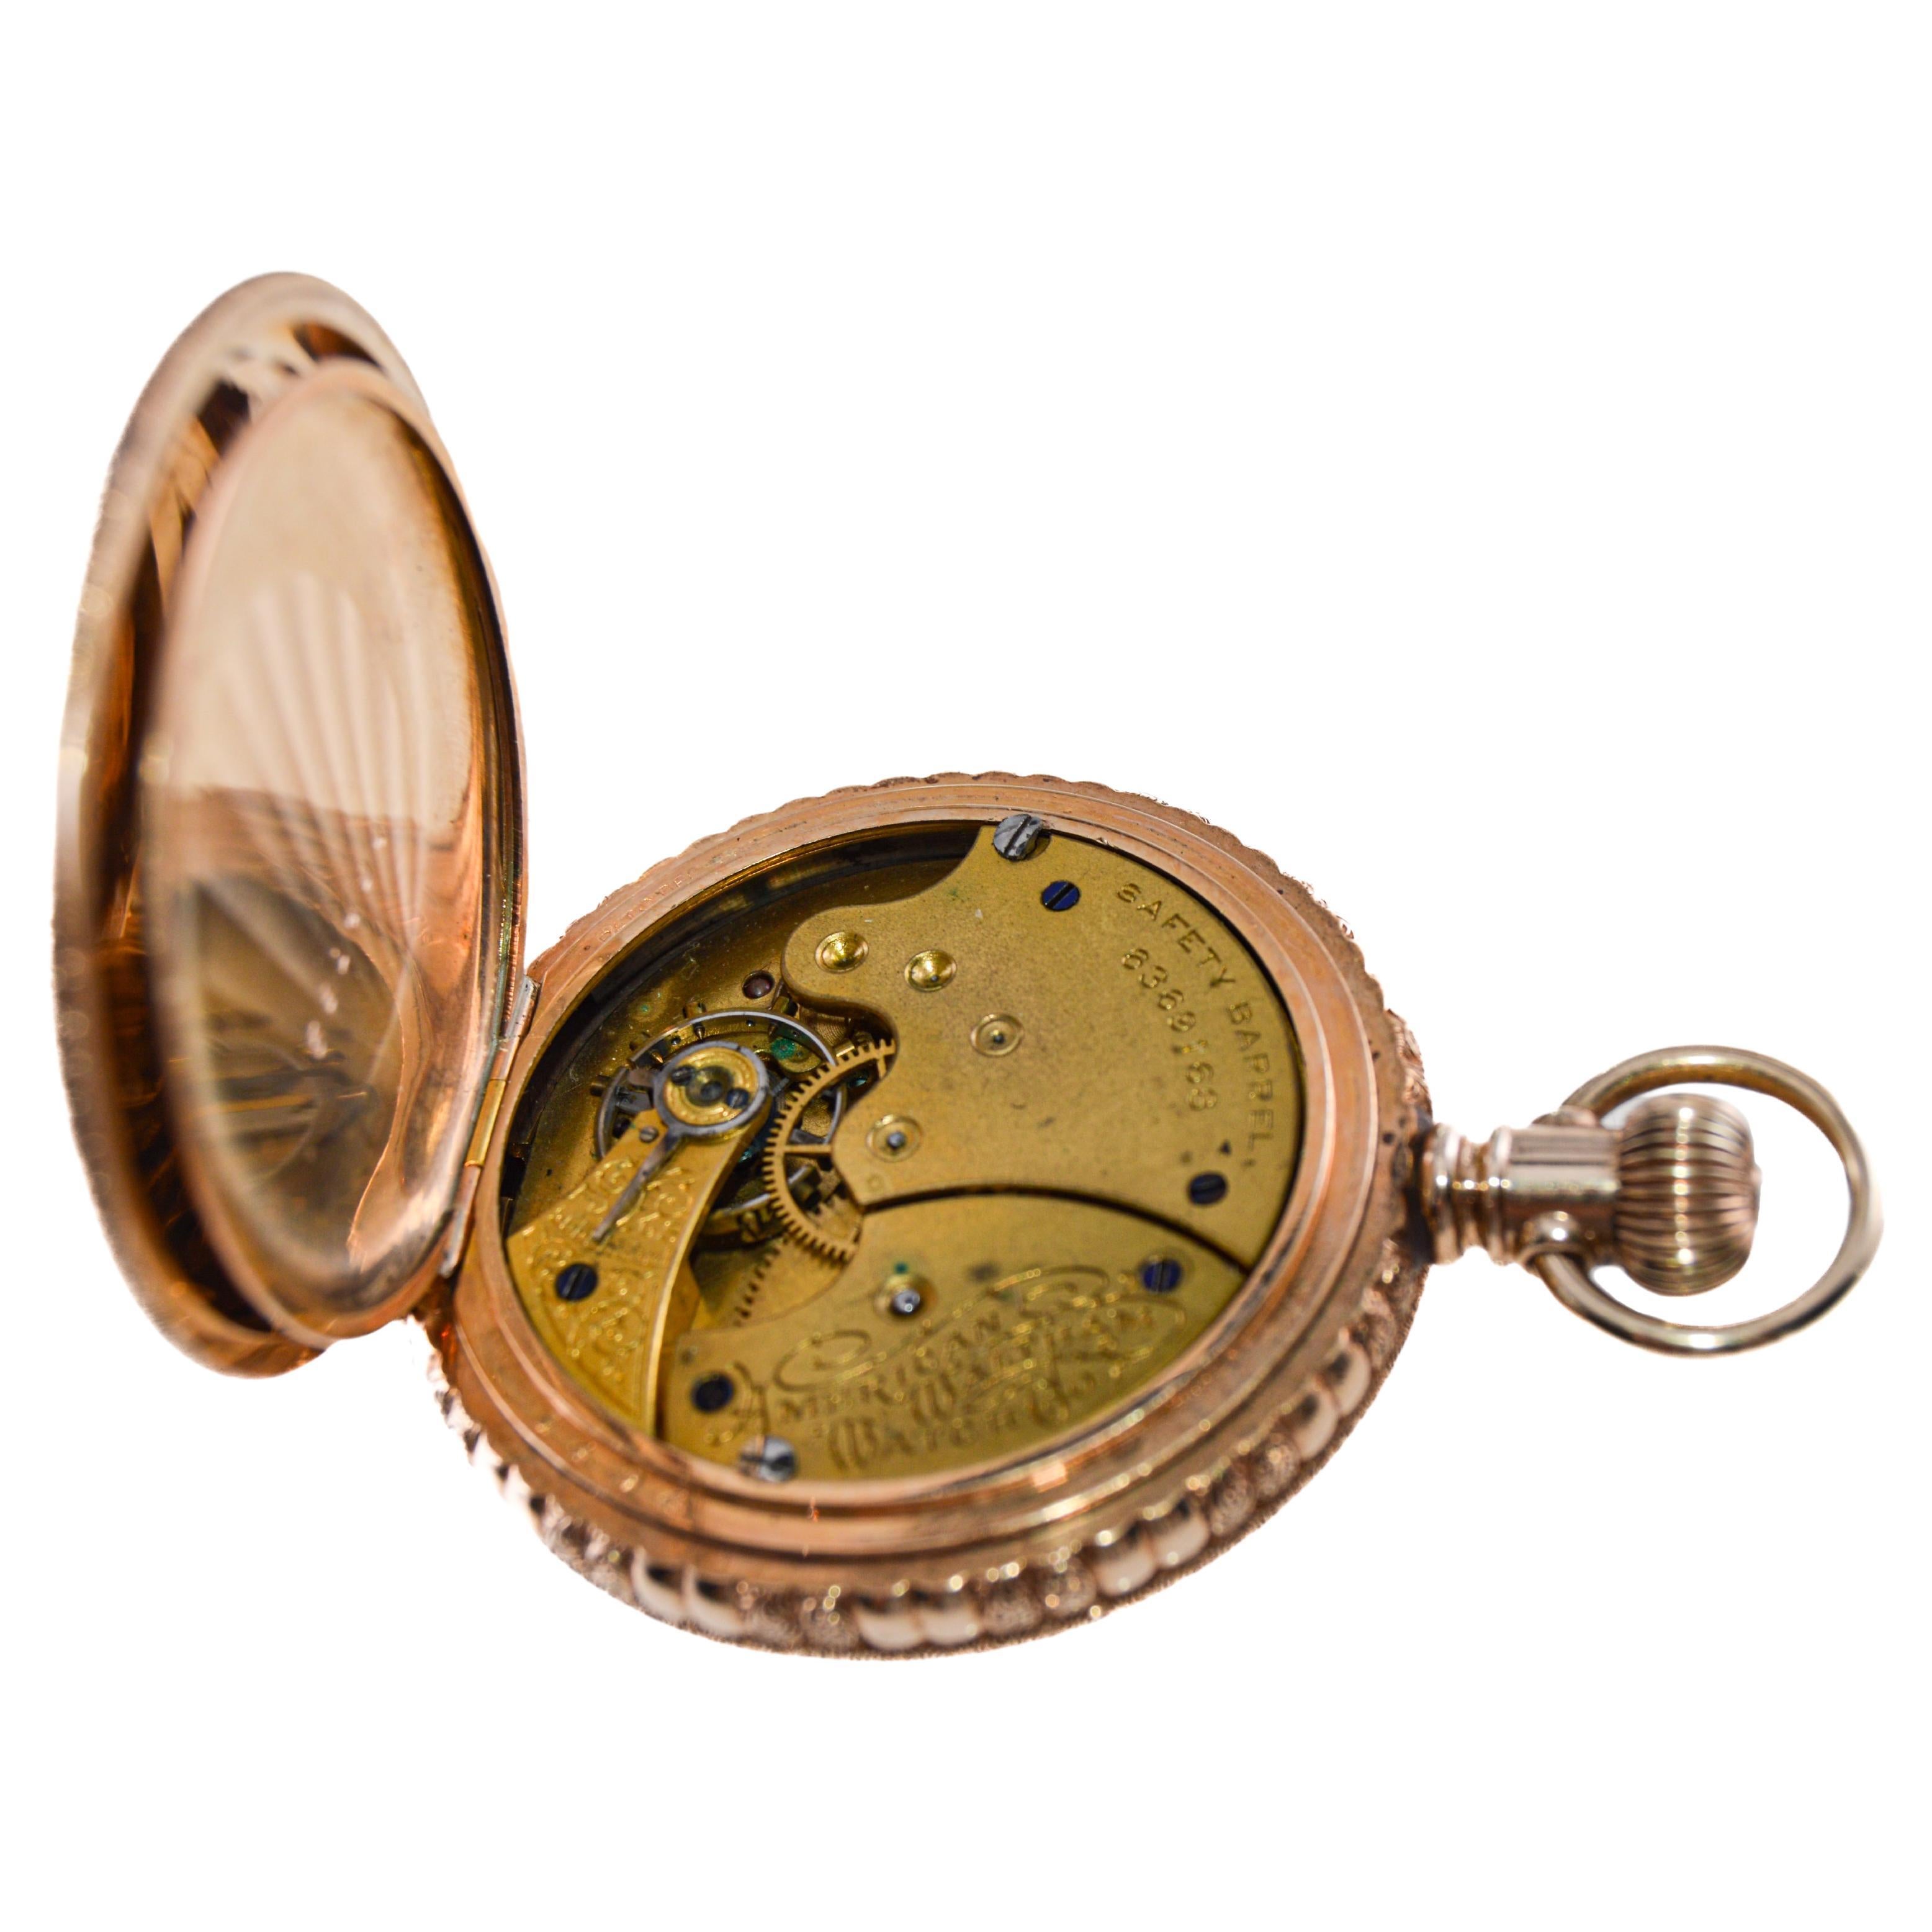 Elgin Gold Filled Pocket Watch From 1891 with Original Kiln Fired Enamel Dial  12